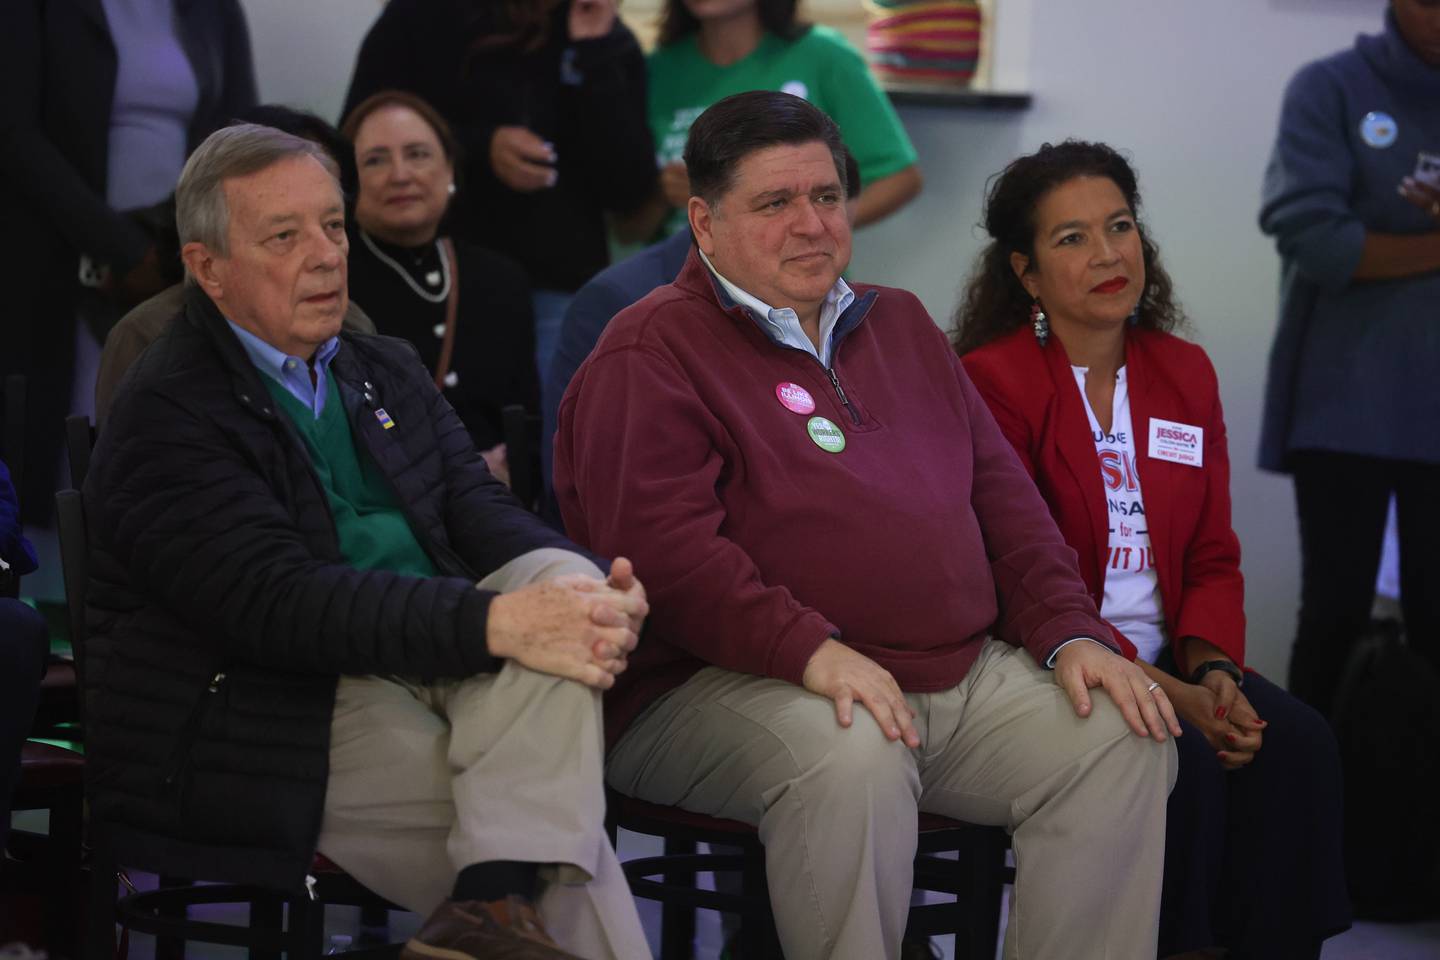 Senator Dick Durbin, left, Governor JB Pritzker and Will County Circuit Judge candidate Jessica Colón-Sayre sit together at the Will County Latinx Day of Action, an effort to talk with and engage with Latinx voters, at El Camaleon Bar and Grlll in Joliet. Saturday, Oct. 1, 2022, in Joliet.